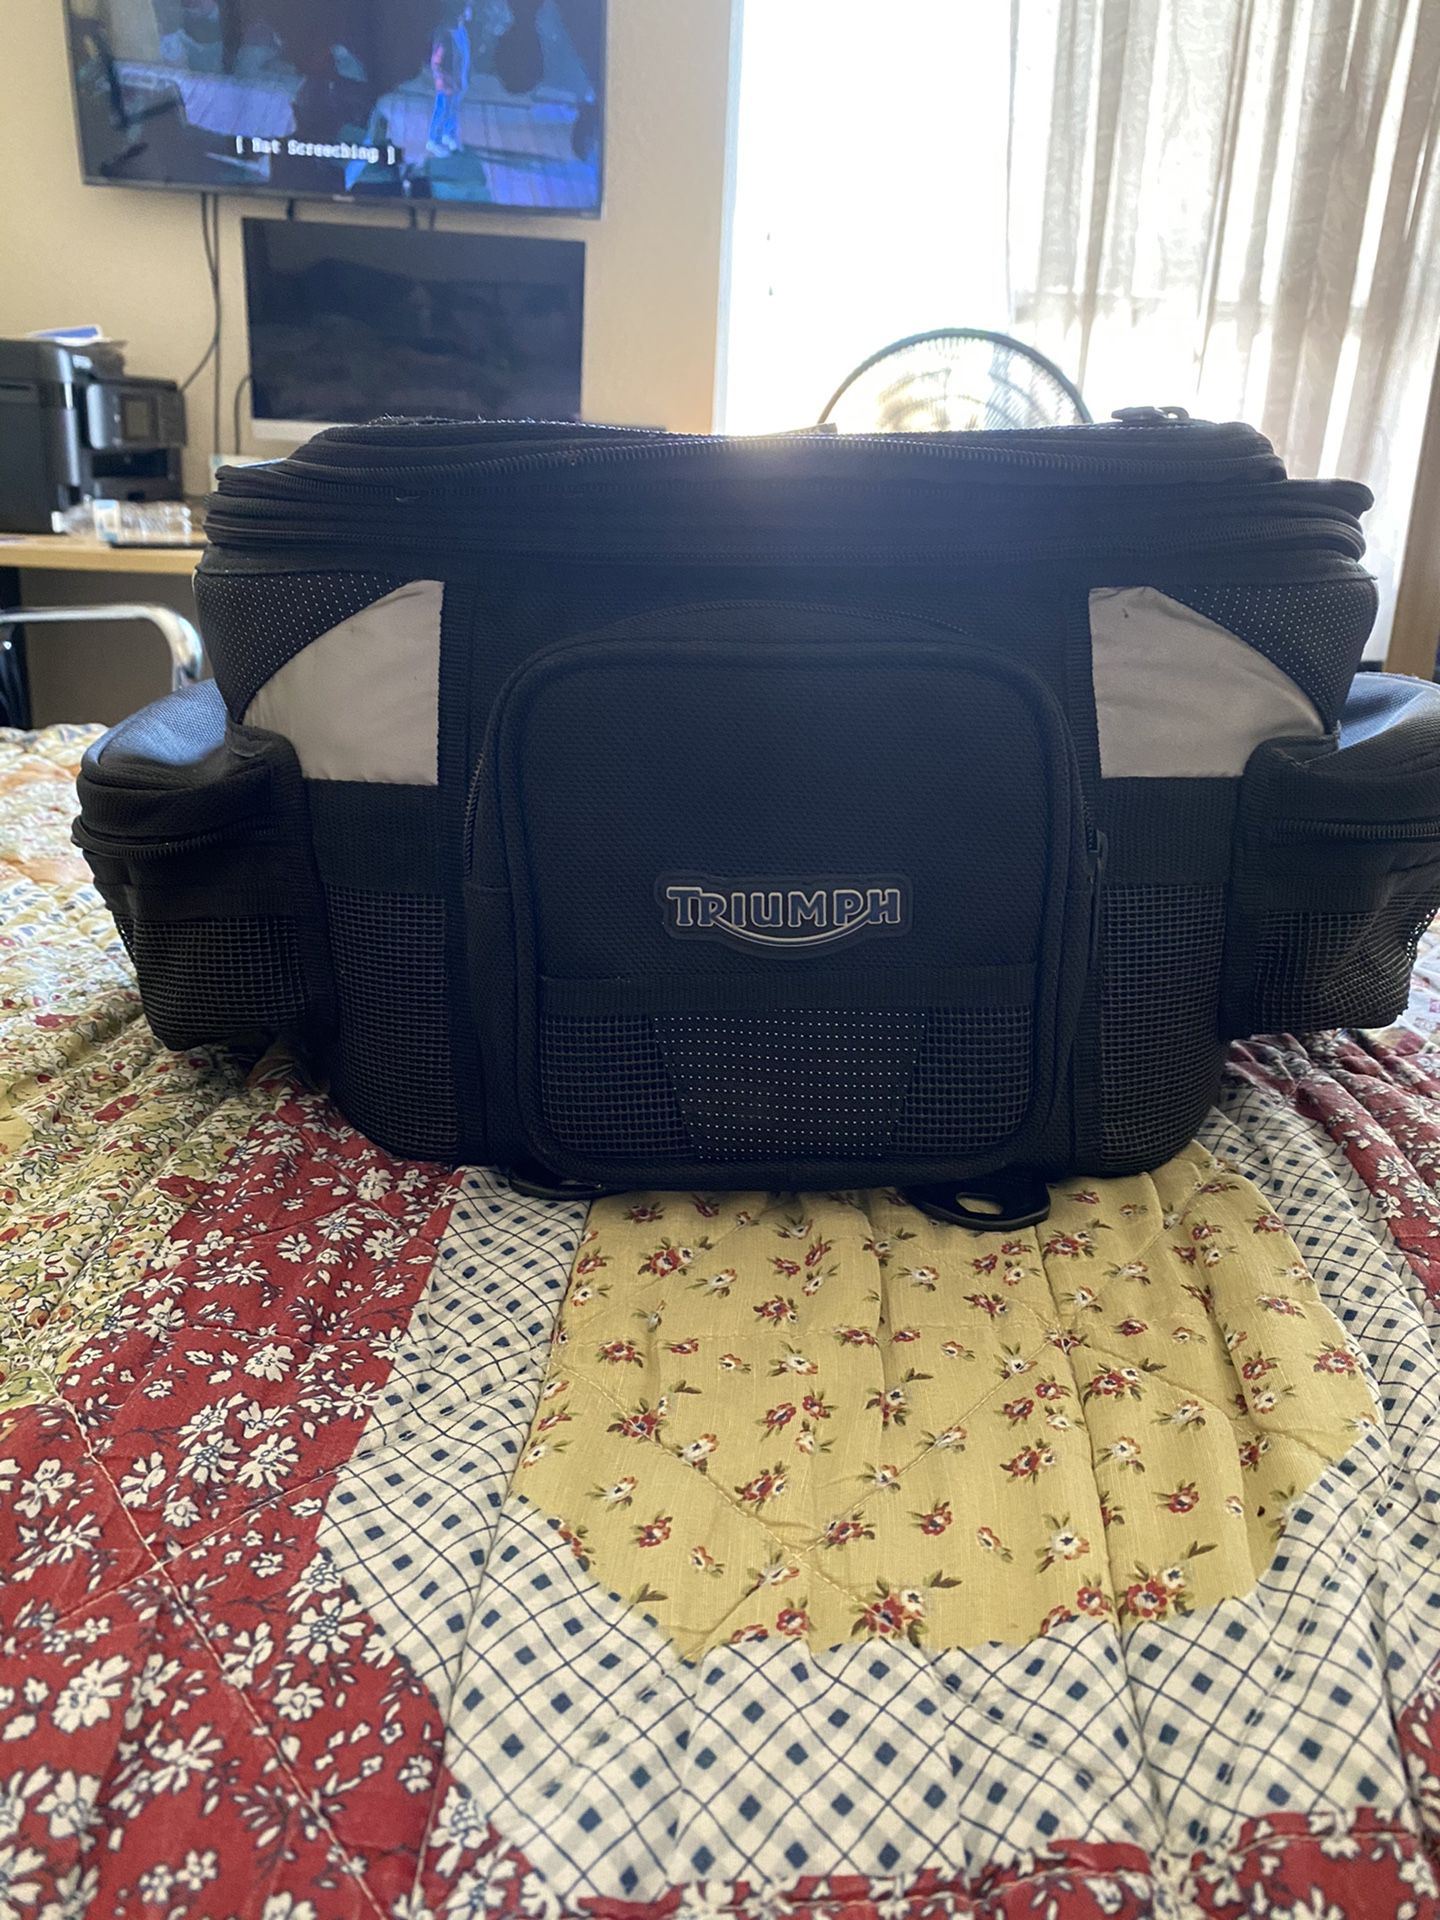 Triumph motorcycle magnetic bag